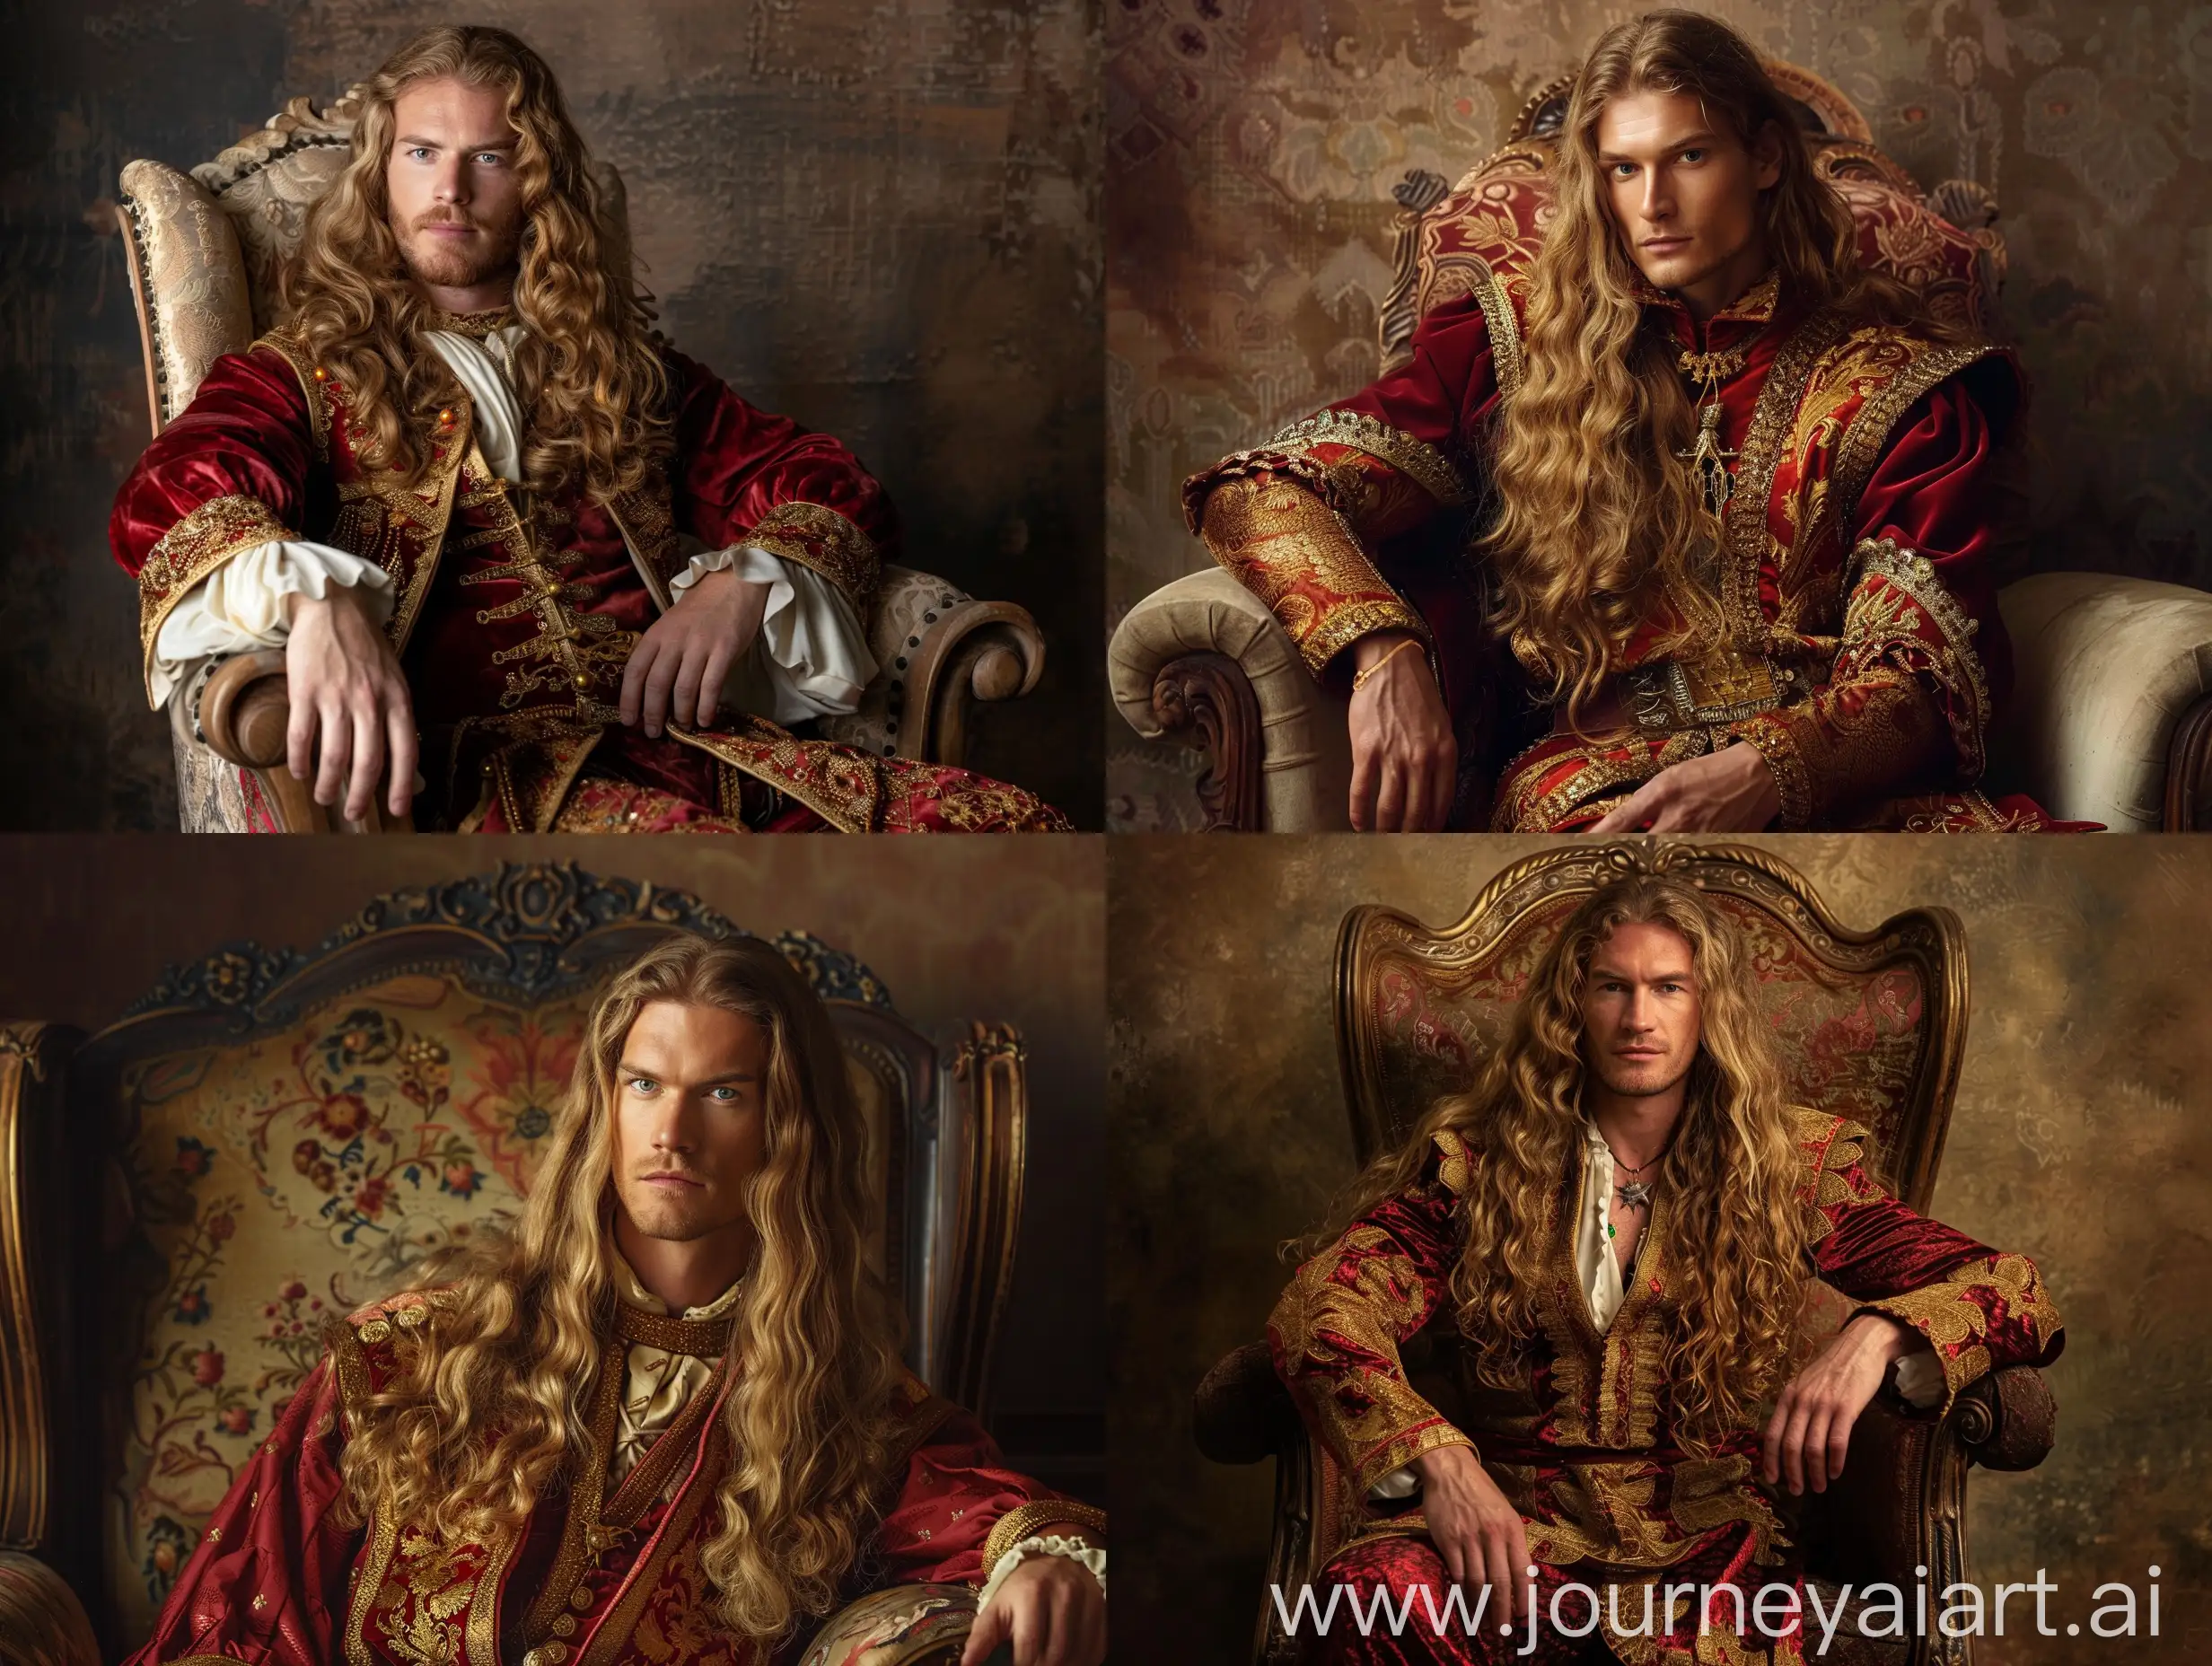 A handsome man of about thirty-five with long wavy blond hair in a rich red and golden medieval costume sits in the antique arm-chair